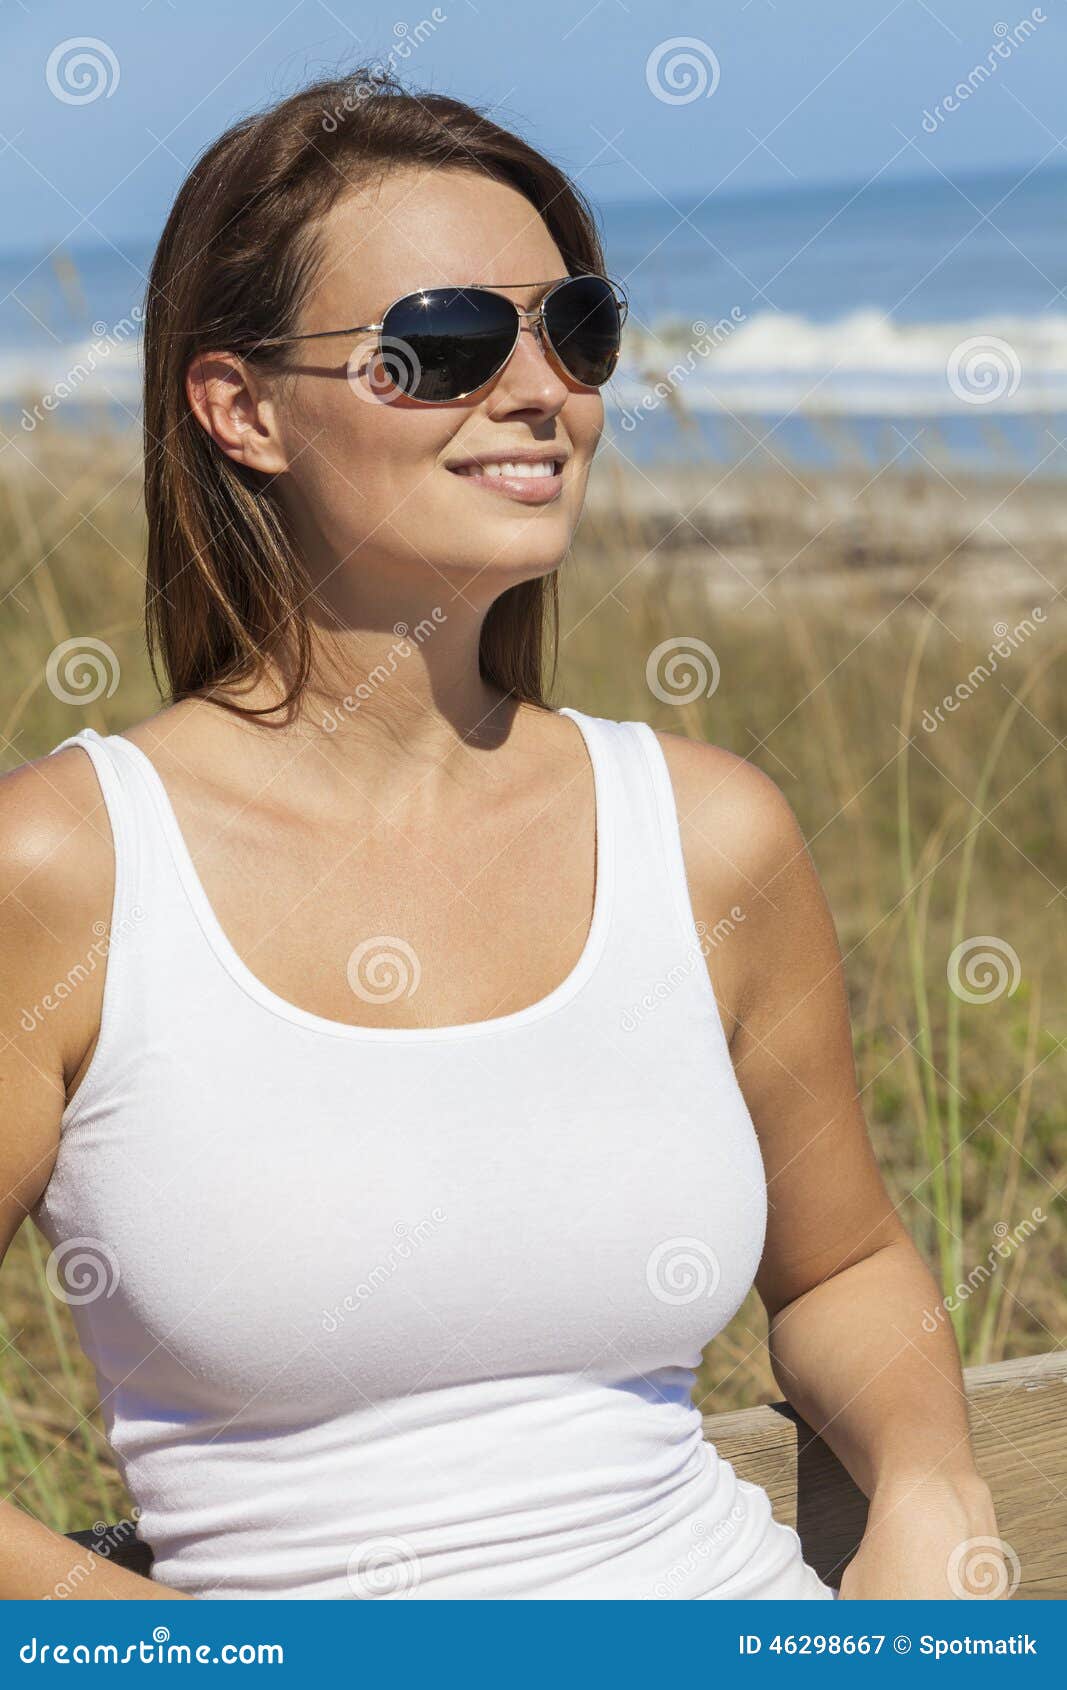 Woman In White Dress And Sunglasses At Beach Stock Image